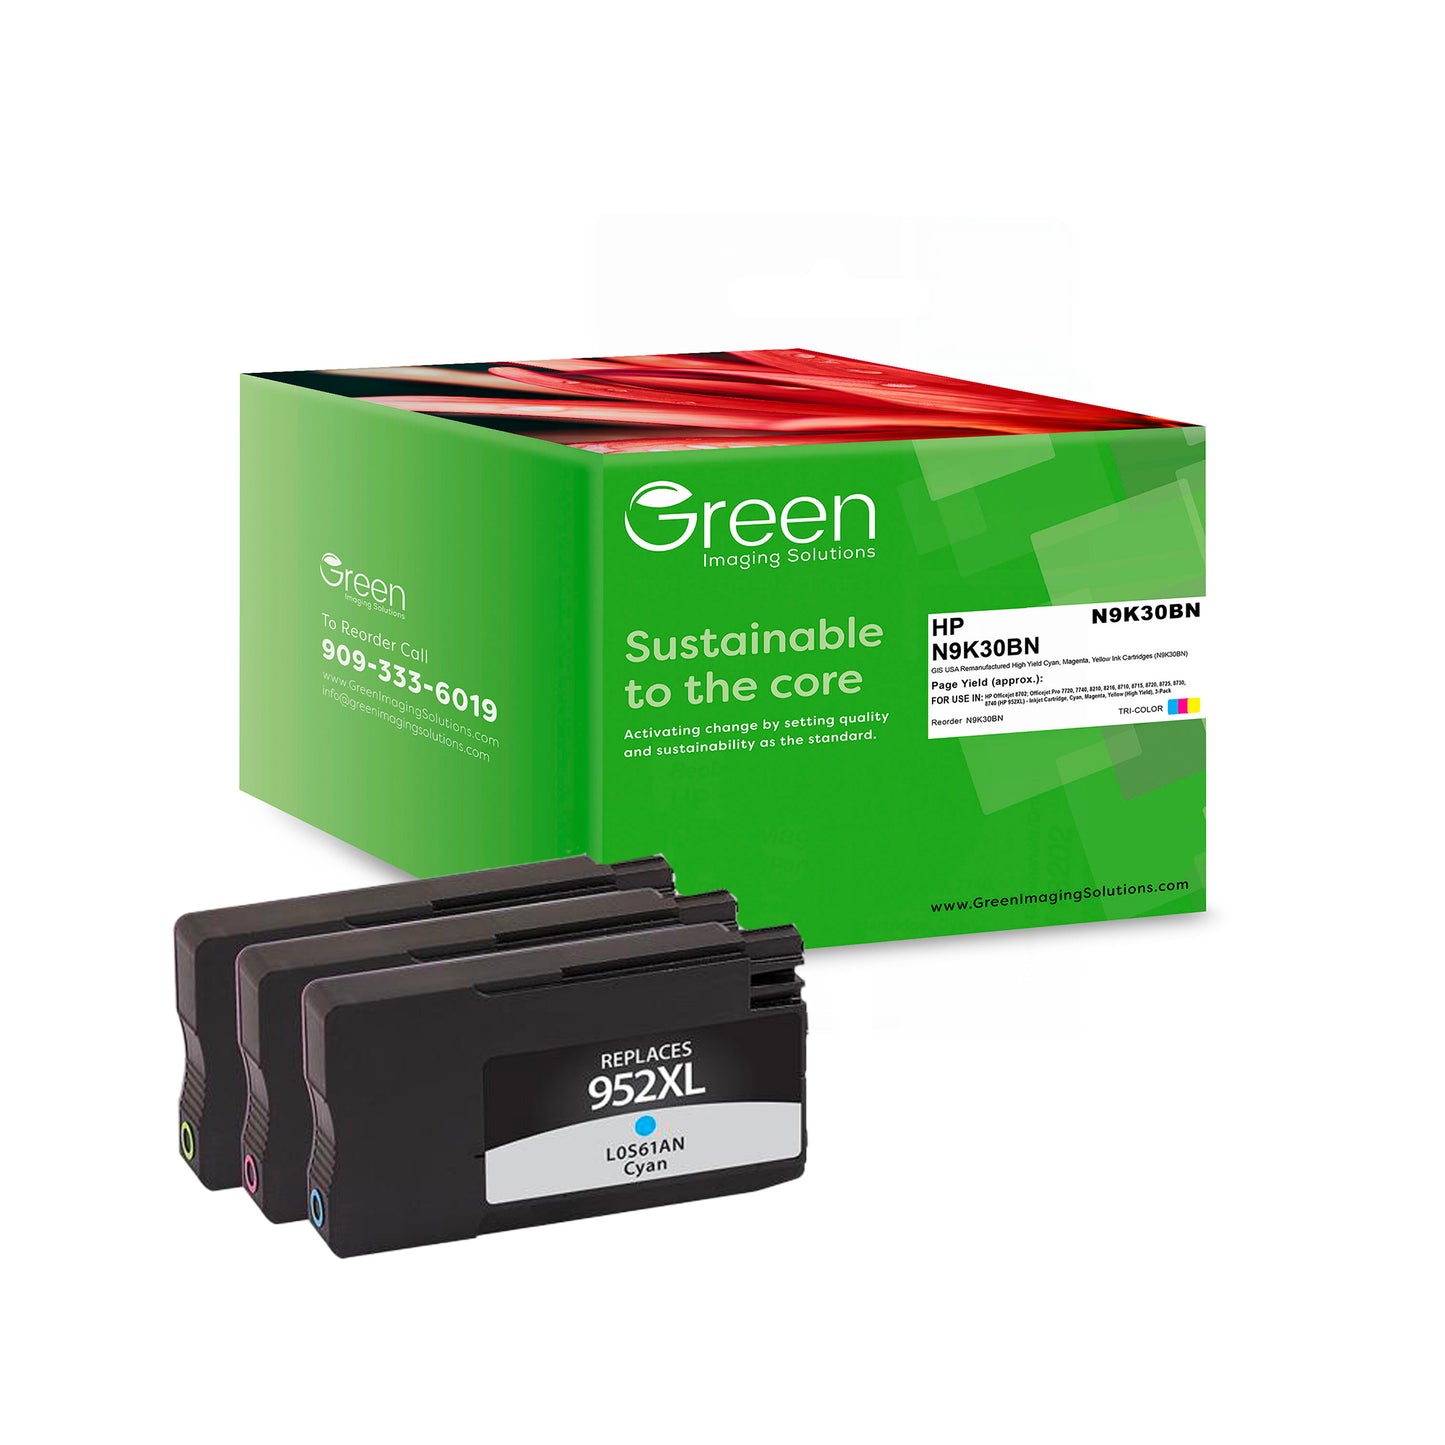 Green Imaging Solutions USA Remanufactured High Yield Cyan, Magenta, Yellow Ink Cartridges for HP 952XL (N9K30BN) 3-Pack